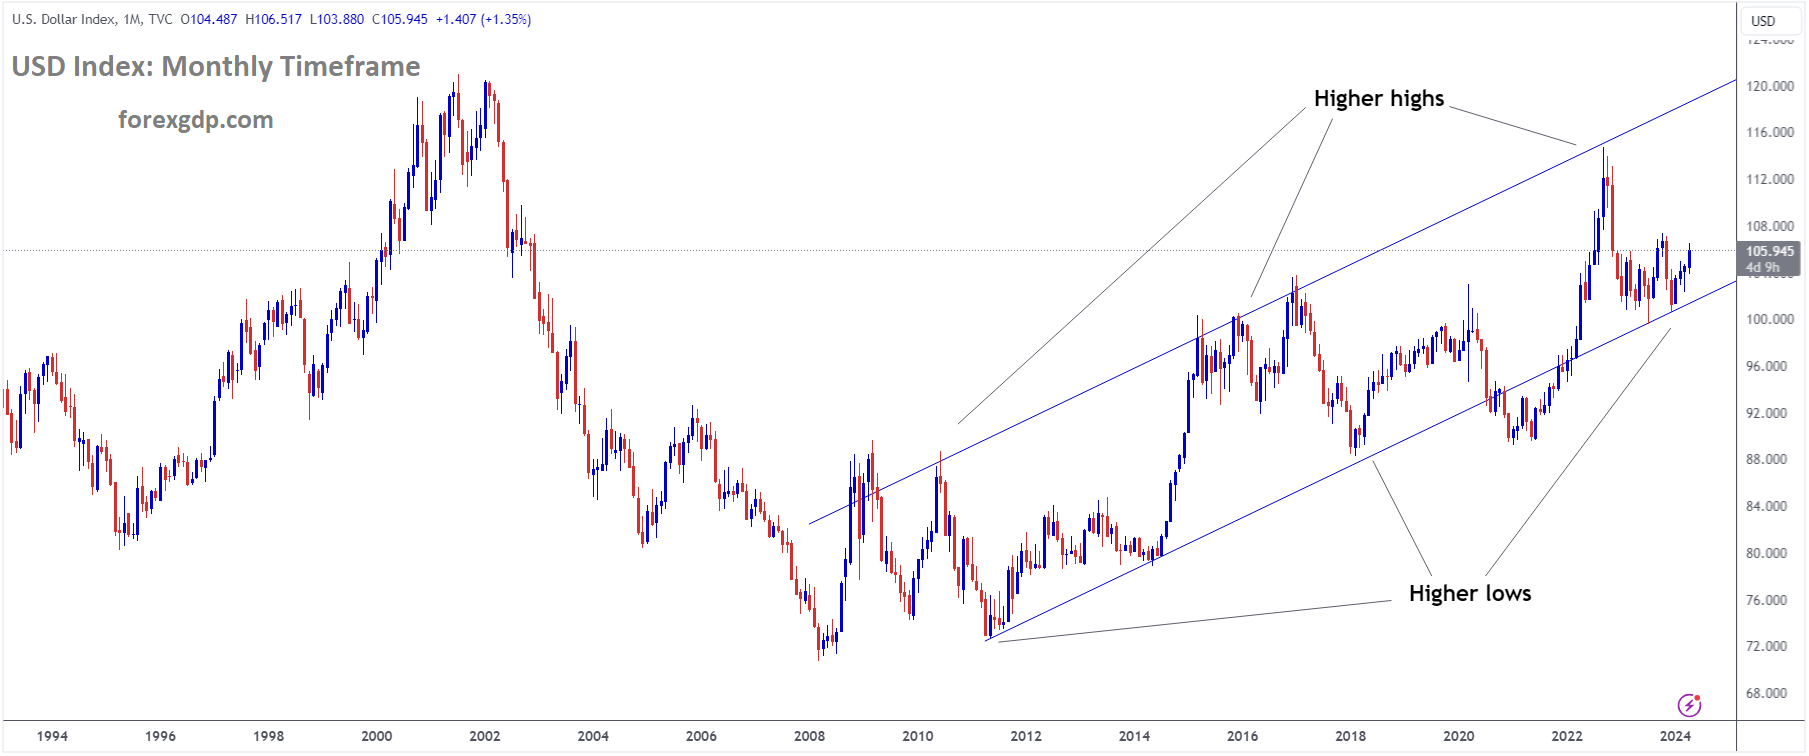 USD Index Market Price is moving in Ascending channel and market has rebounded from the higher low area of the channel